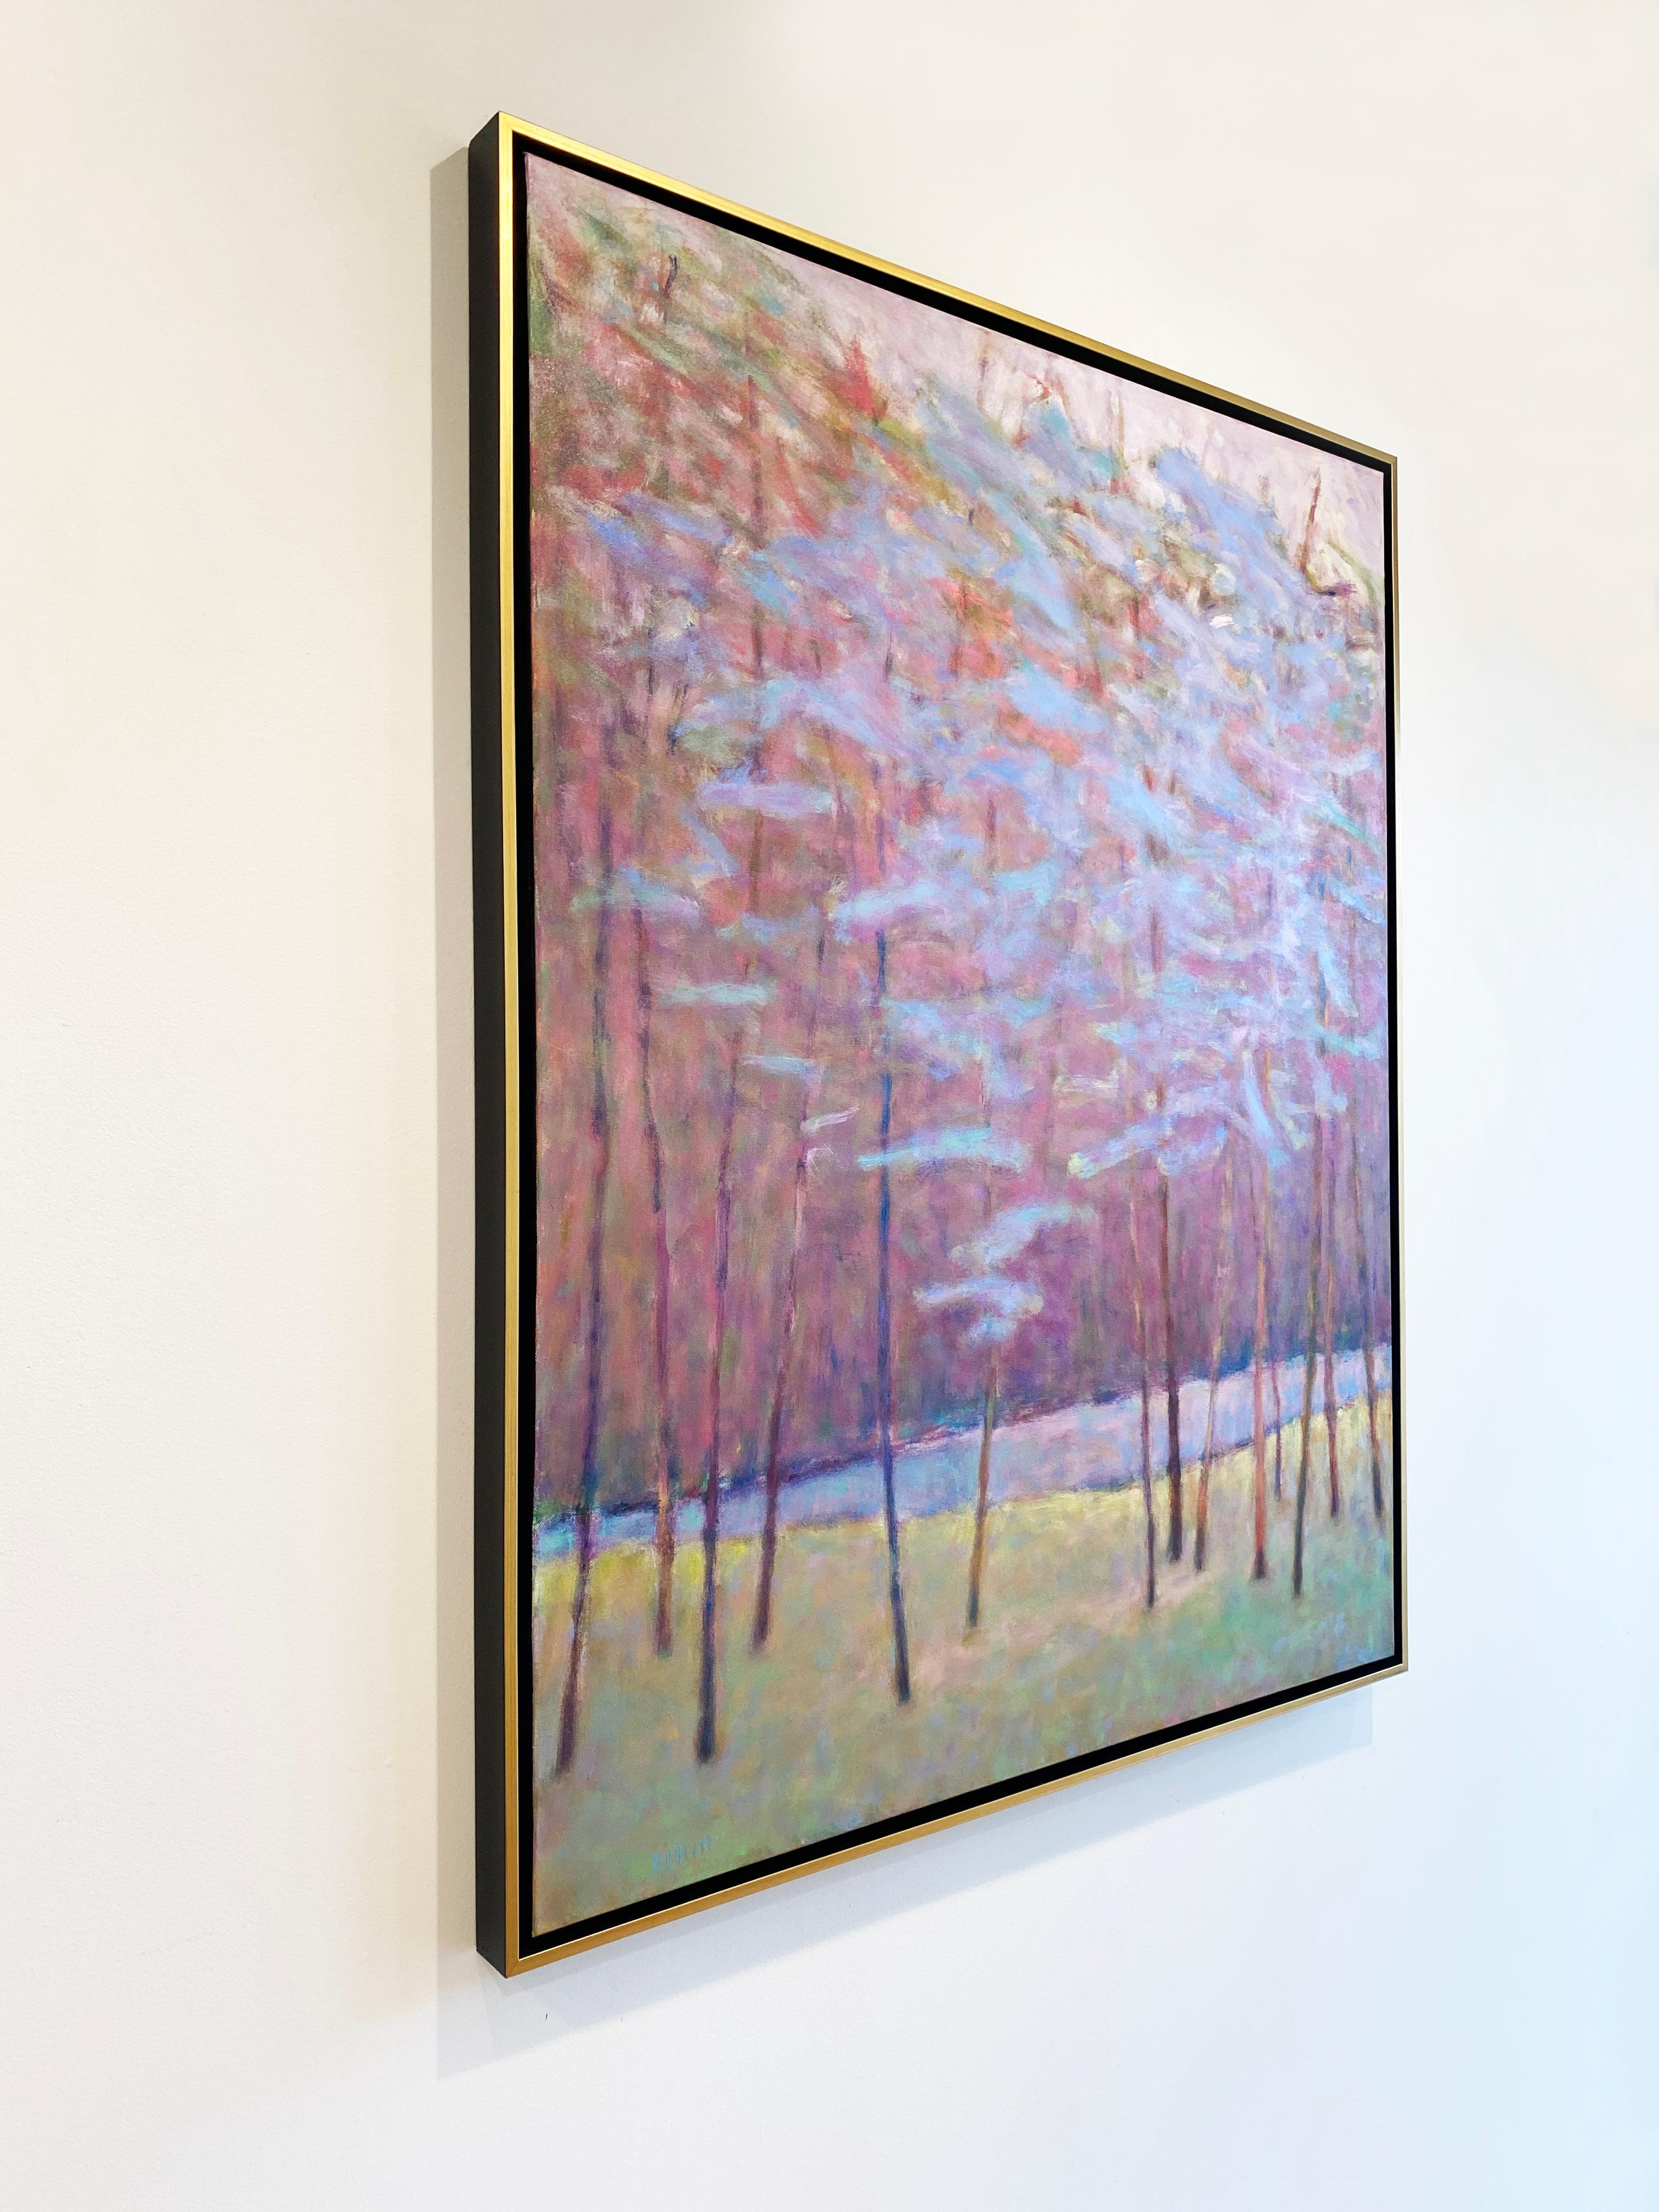 'Soft Tones at the Creek' 2022 by American artist, Ken Elliott. Oil on canvas, 50 x 40 in. / Frame: 51.5 x 41.75 in. This painting of a forest and ground comprises of colors in light blue, green, pink, purple, and brown. Framed in a gold painted